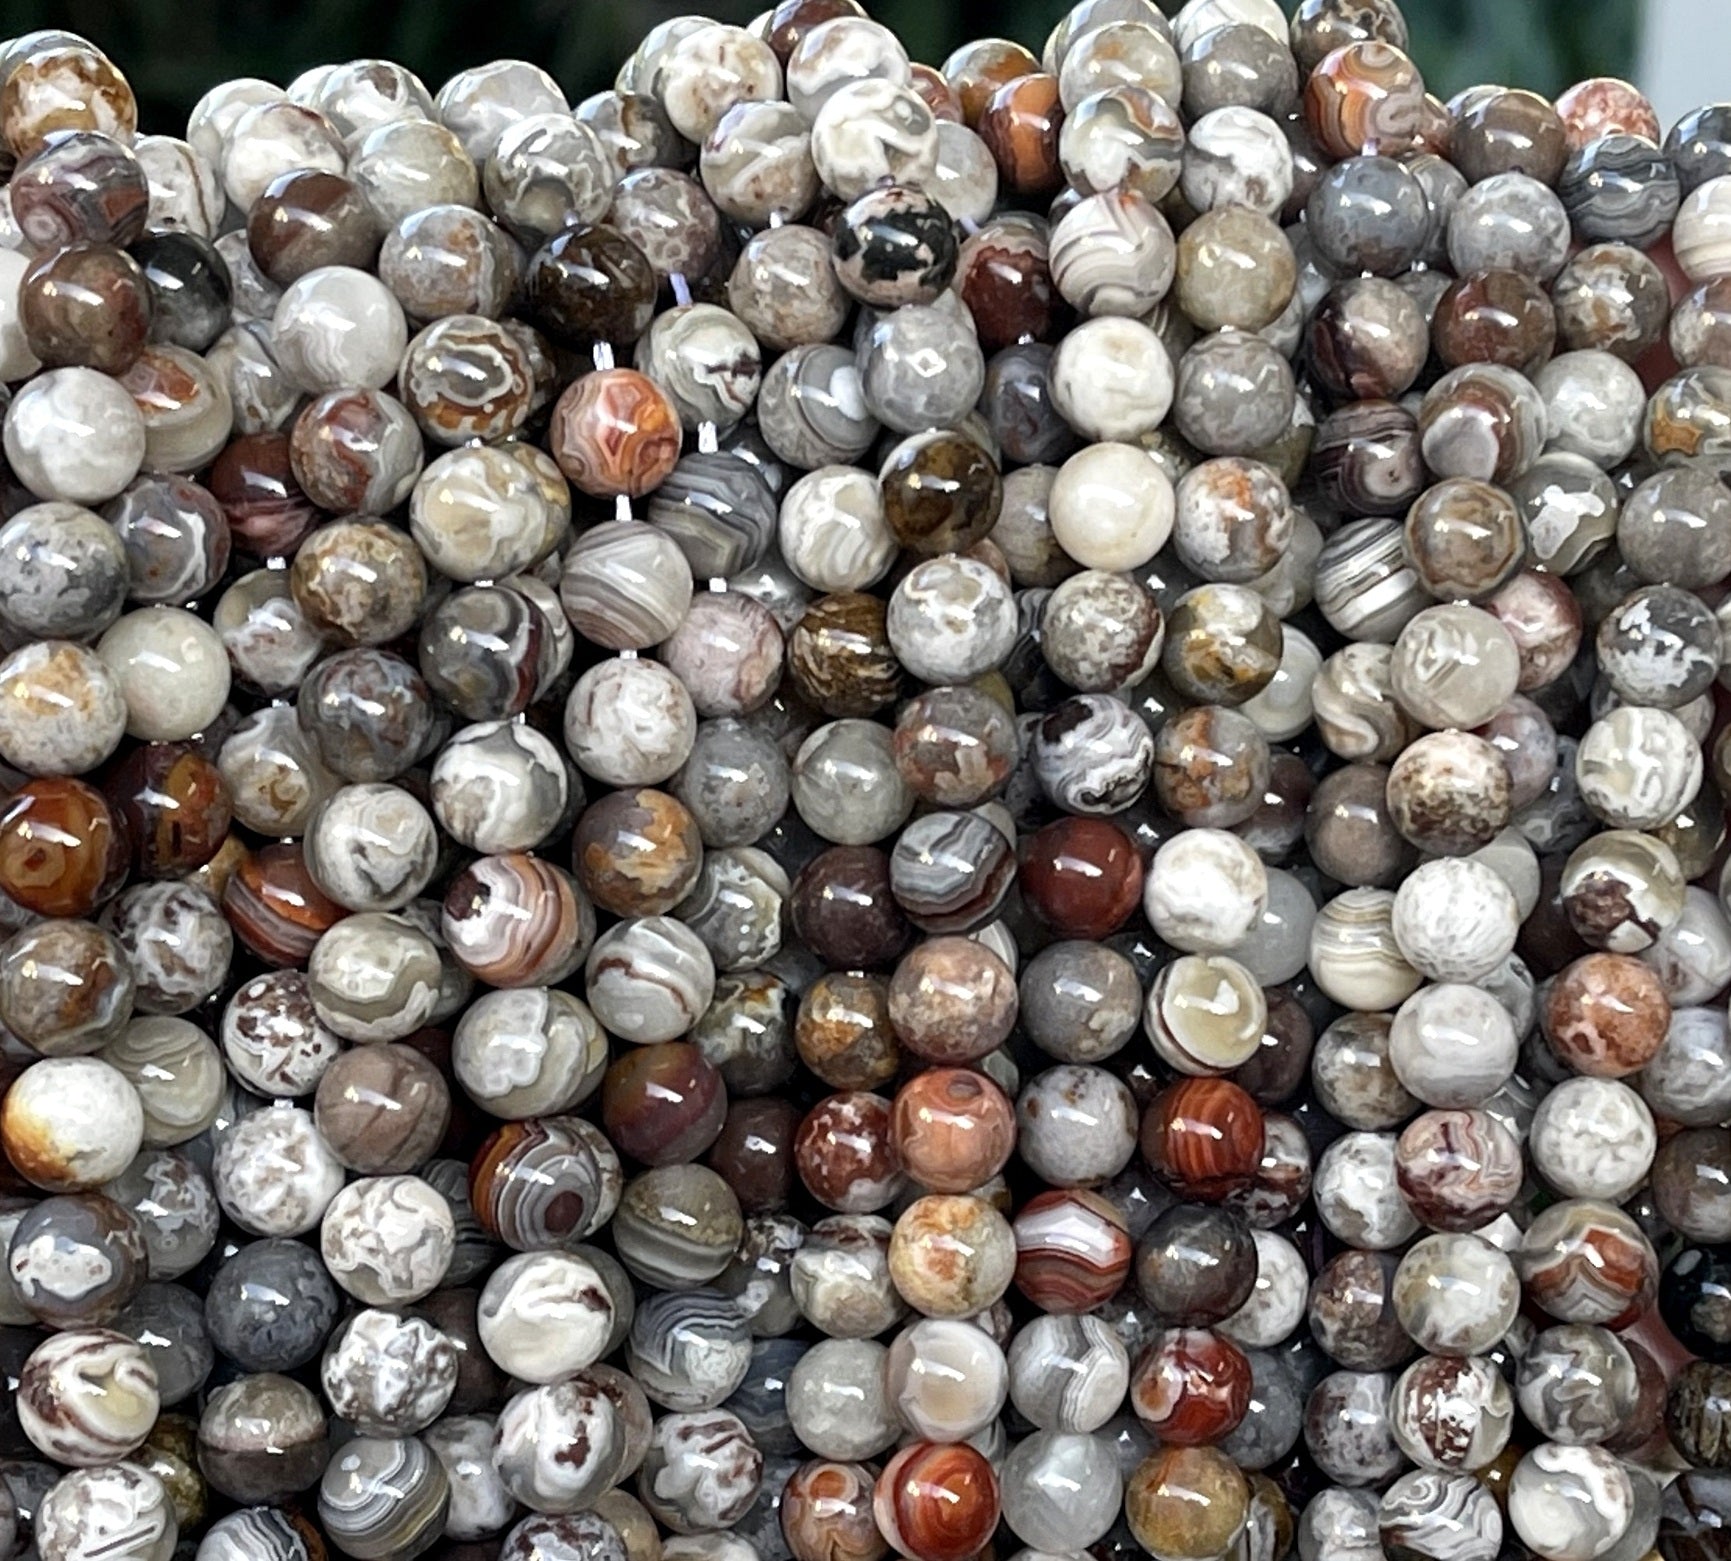 Mexican Laguna Lace Agate 8mm round natural gemstone beads 15.5" strand